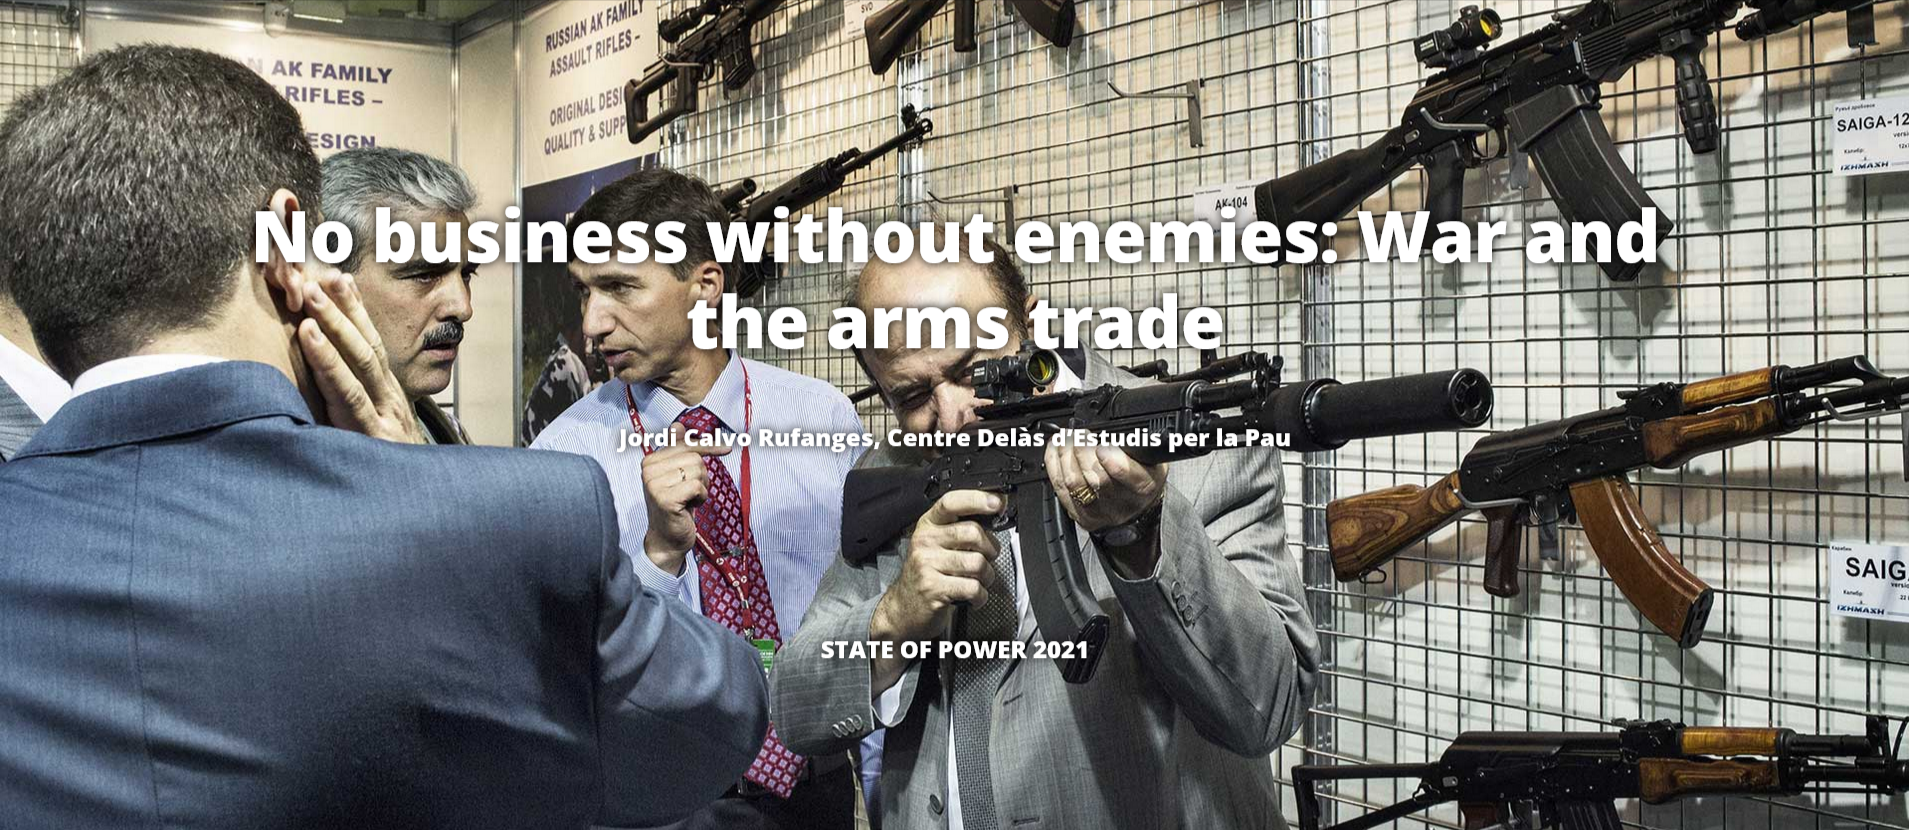 No business without enemies: War and the arms trade